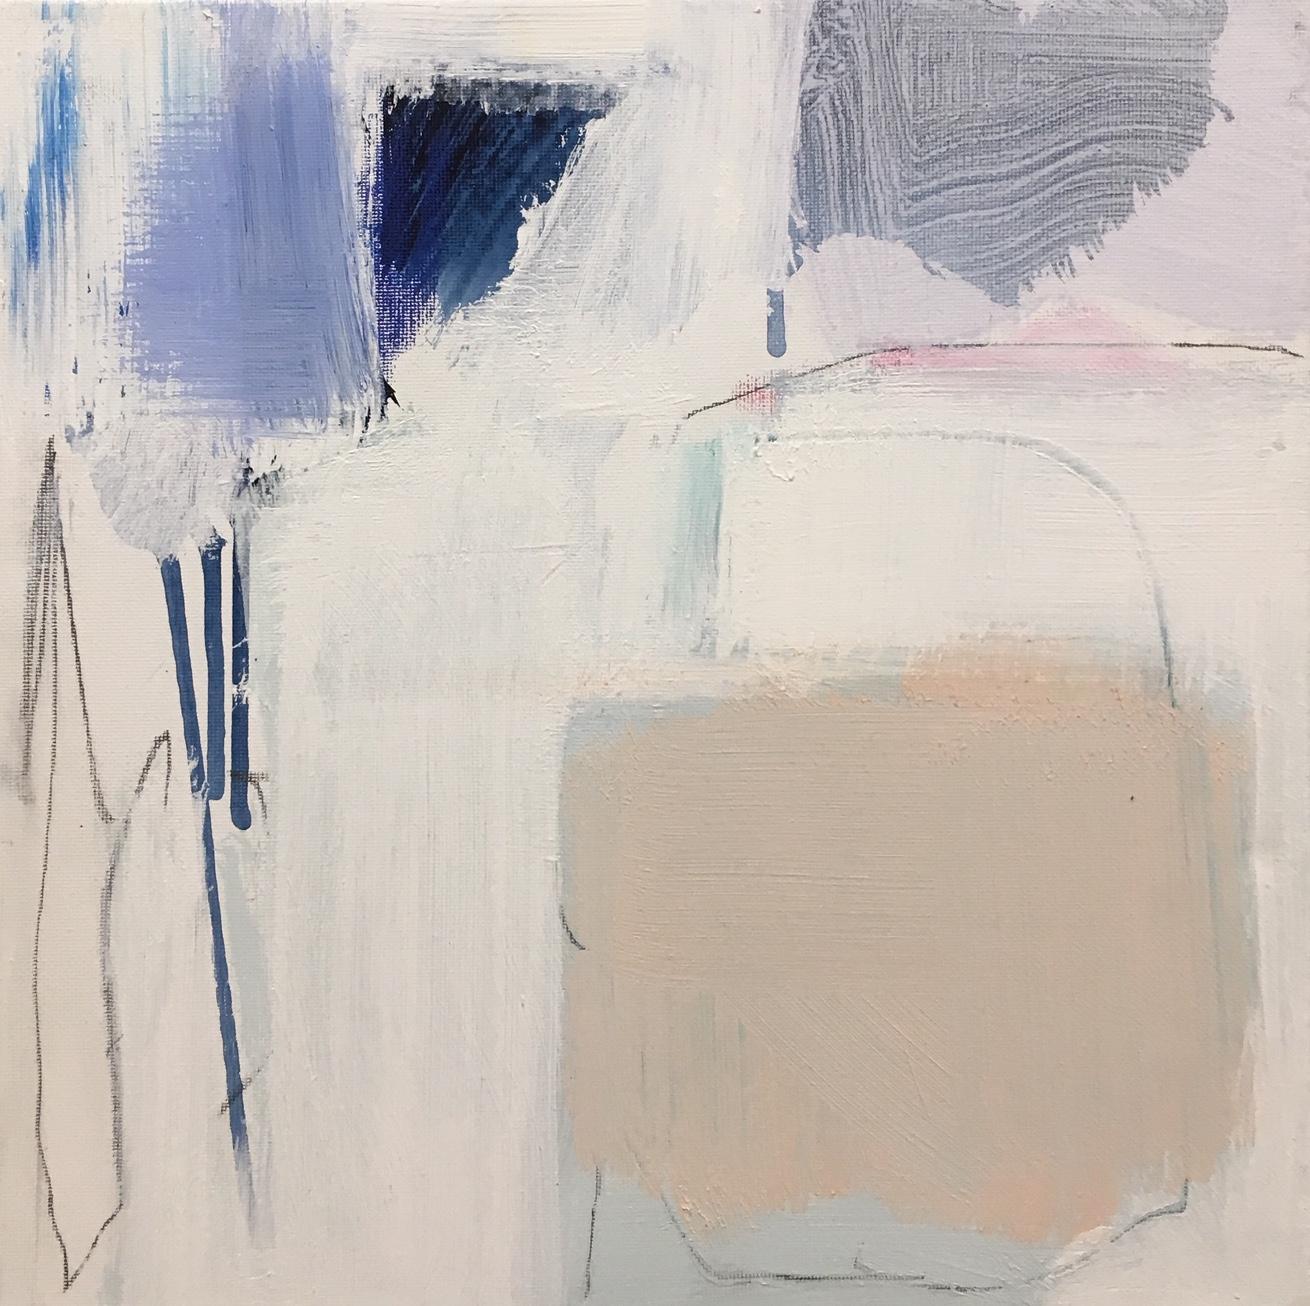 'Placid' is a petite abstract acrylic and mixed media on canvas painting of square format created by American artist Ellen Rolli in 2019. Featuring a palette mostly made of white, cream, blue and grey tones, the painting exudes an impression of